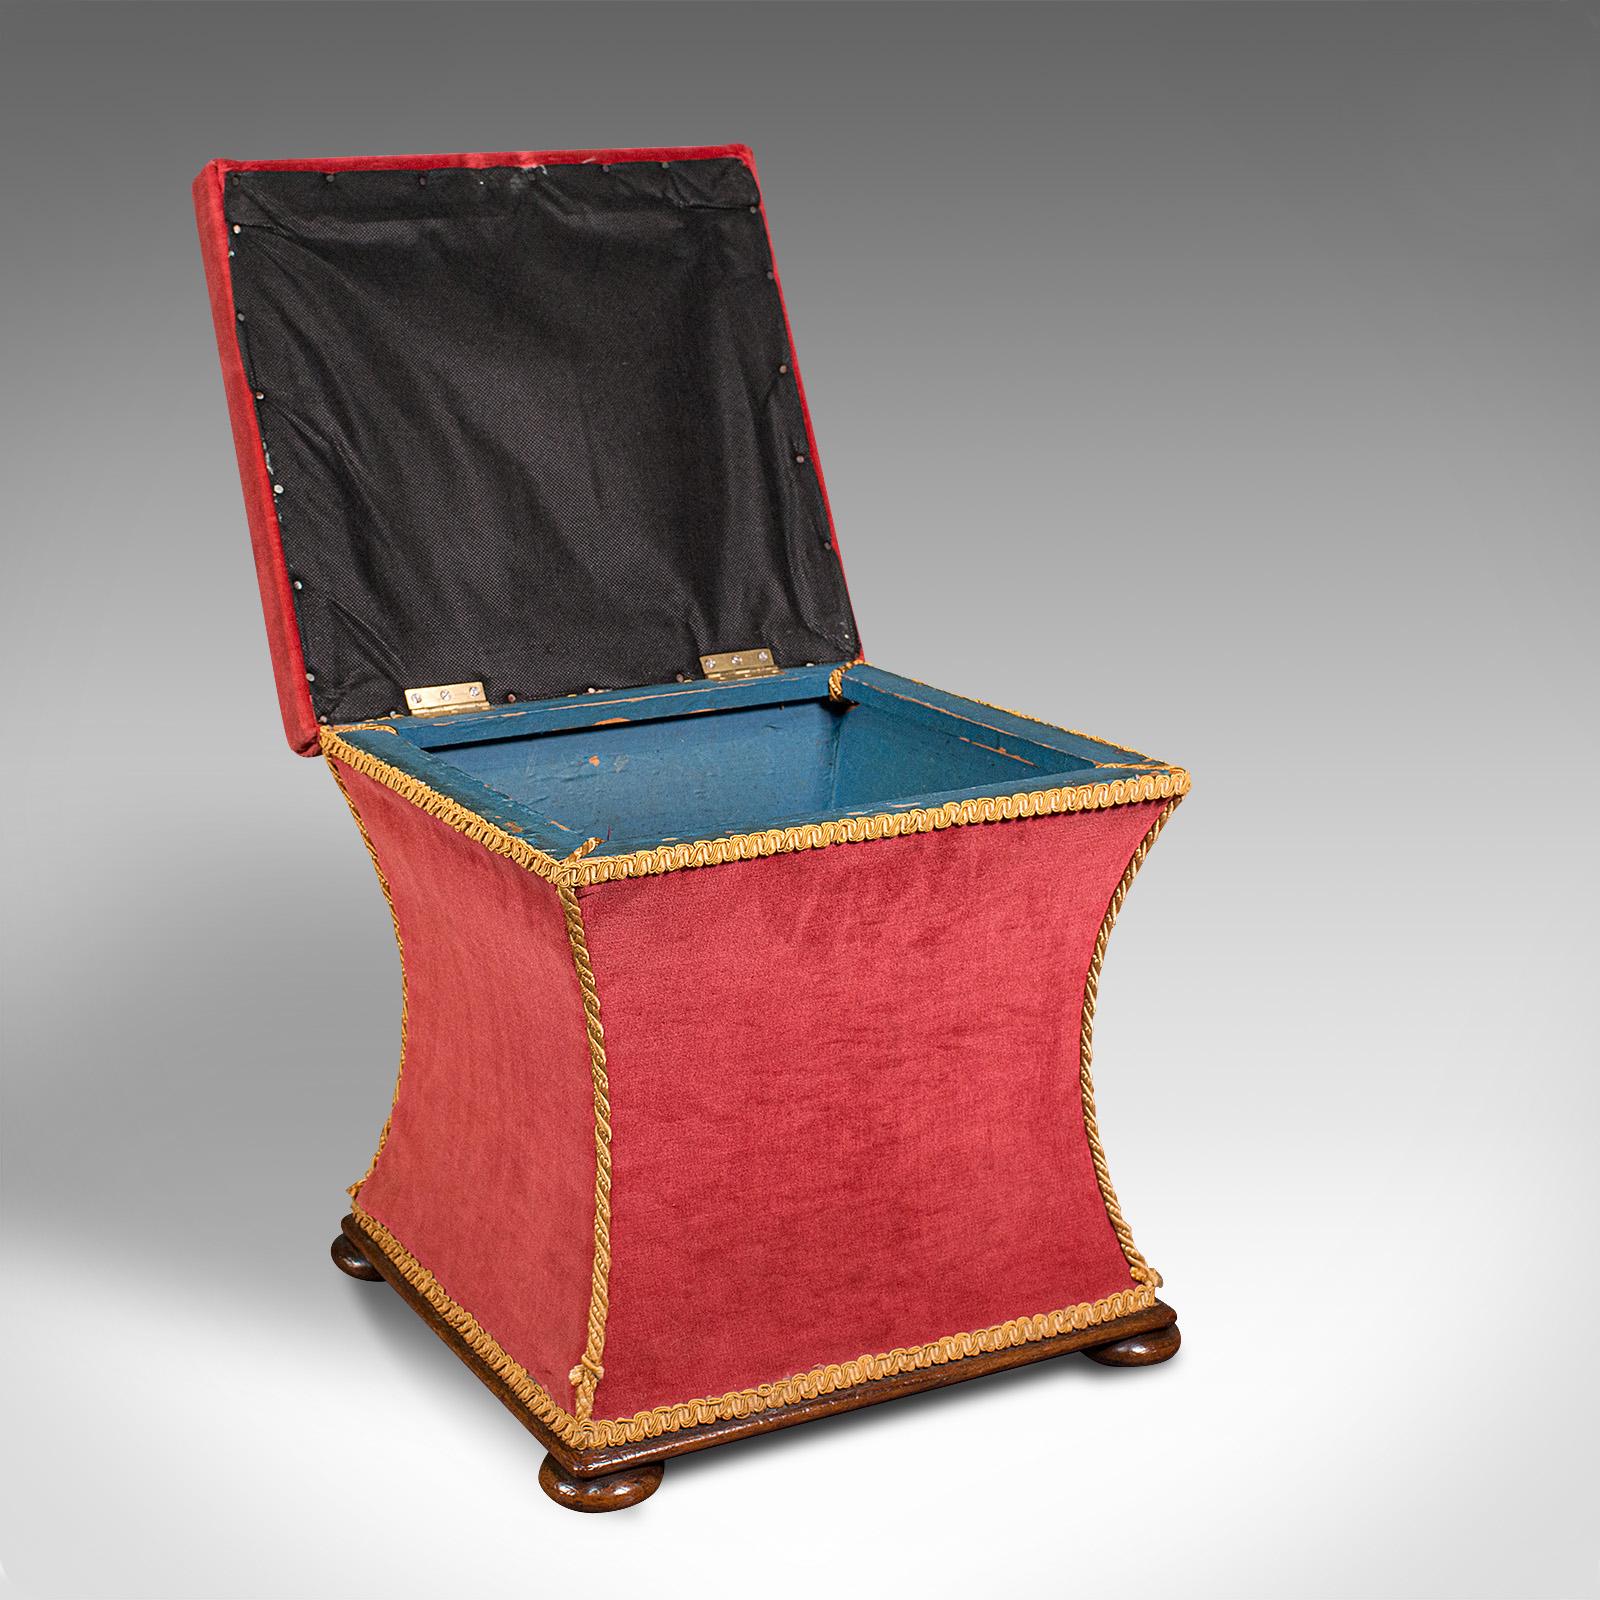 This is an antique ottoman. An English, velour dressing or sewing stool, dating to the Victorian period, circa 1890.

Captivating colour and appealing form
Displays a desirable aged patina - some small marks under close inspection
Dressed in